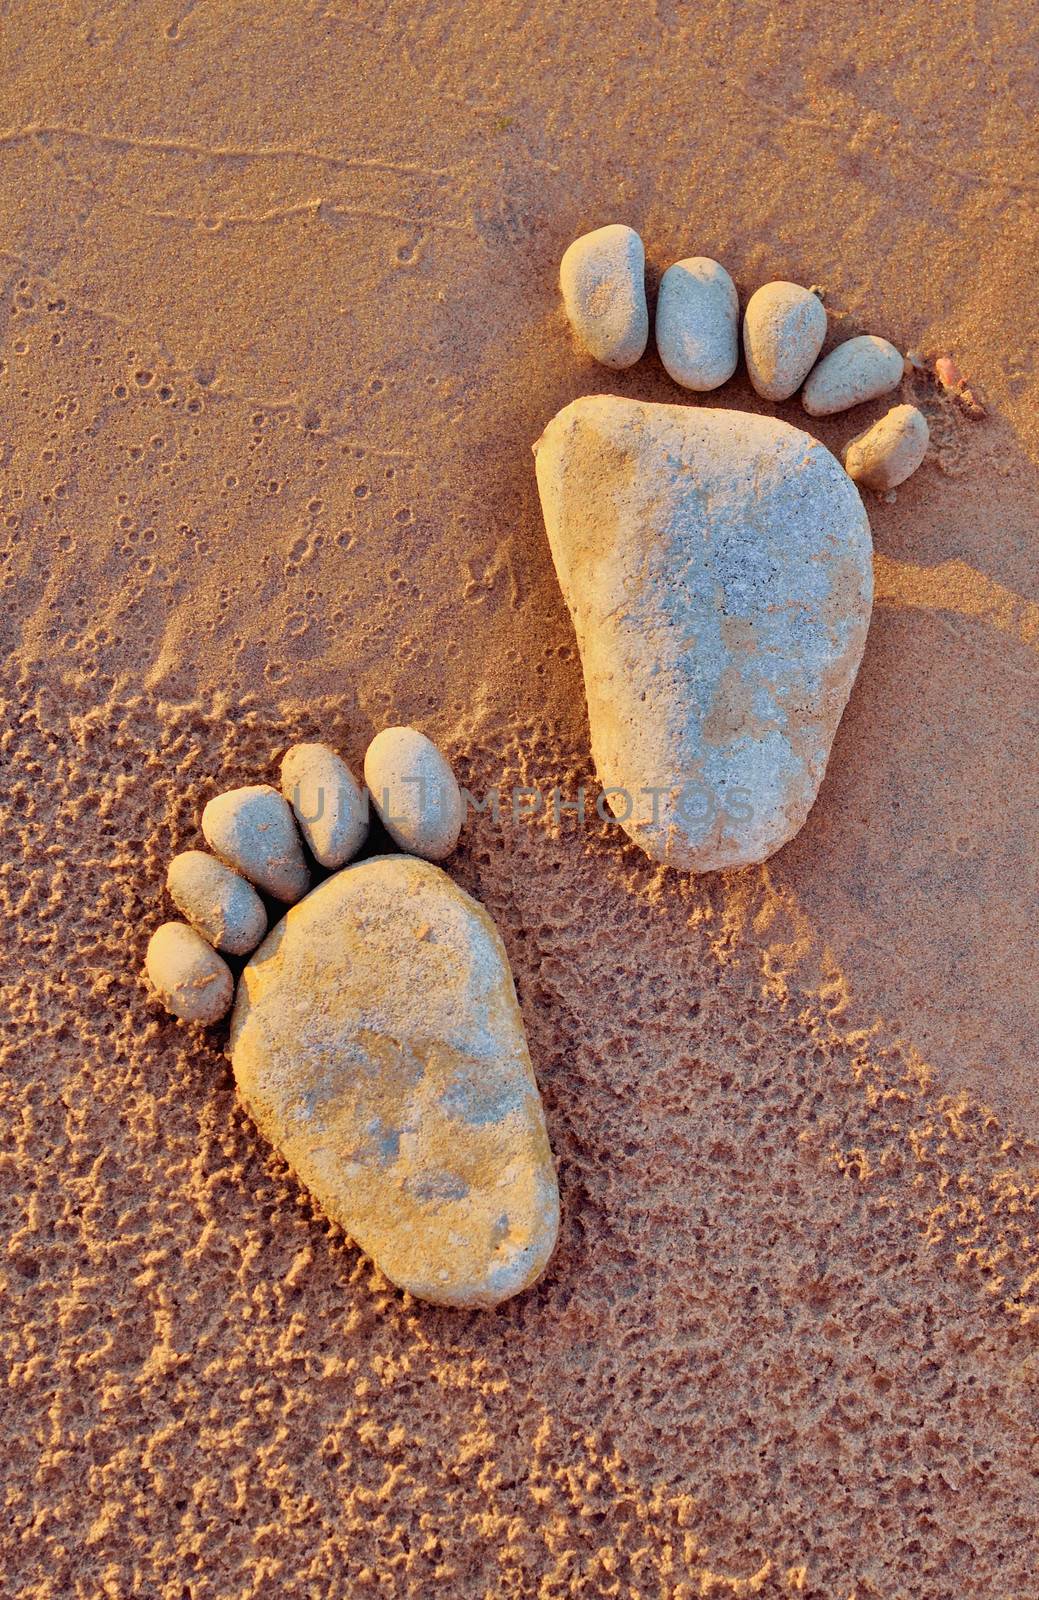 Footsteps of pebbles on the sandy beach